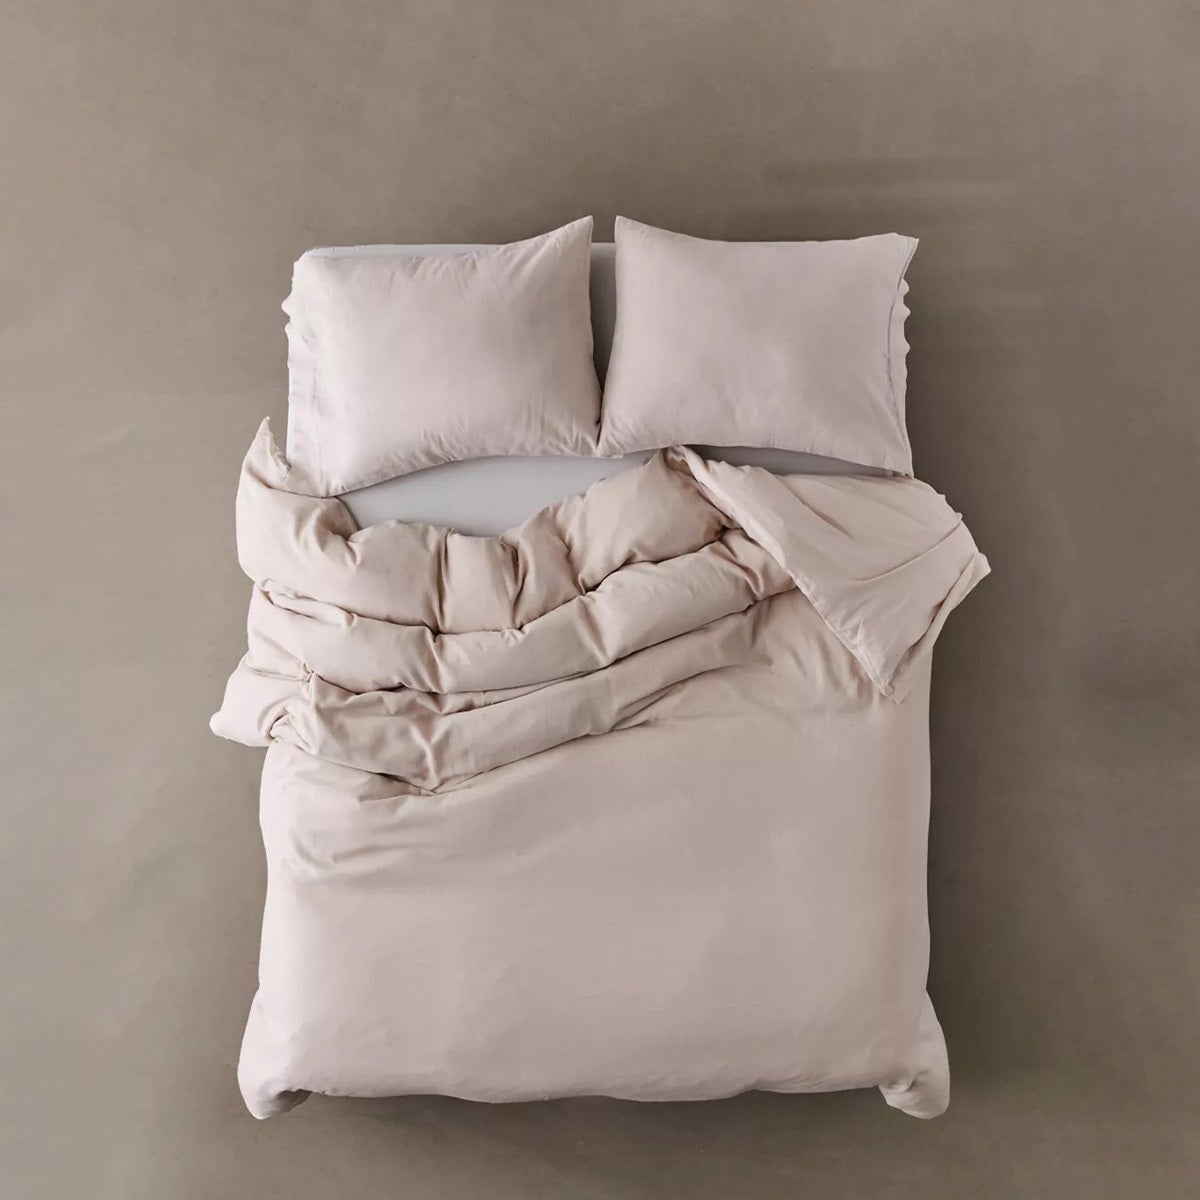 urban outfitters duvet